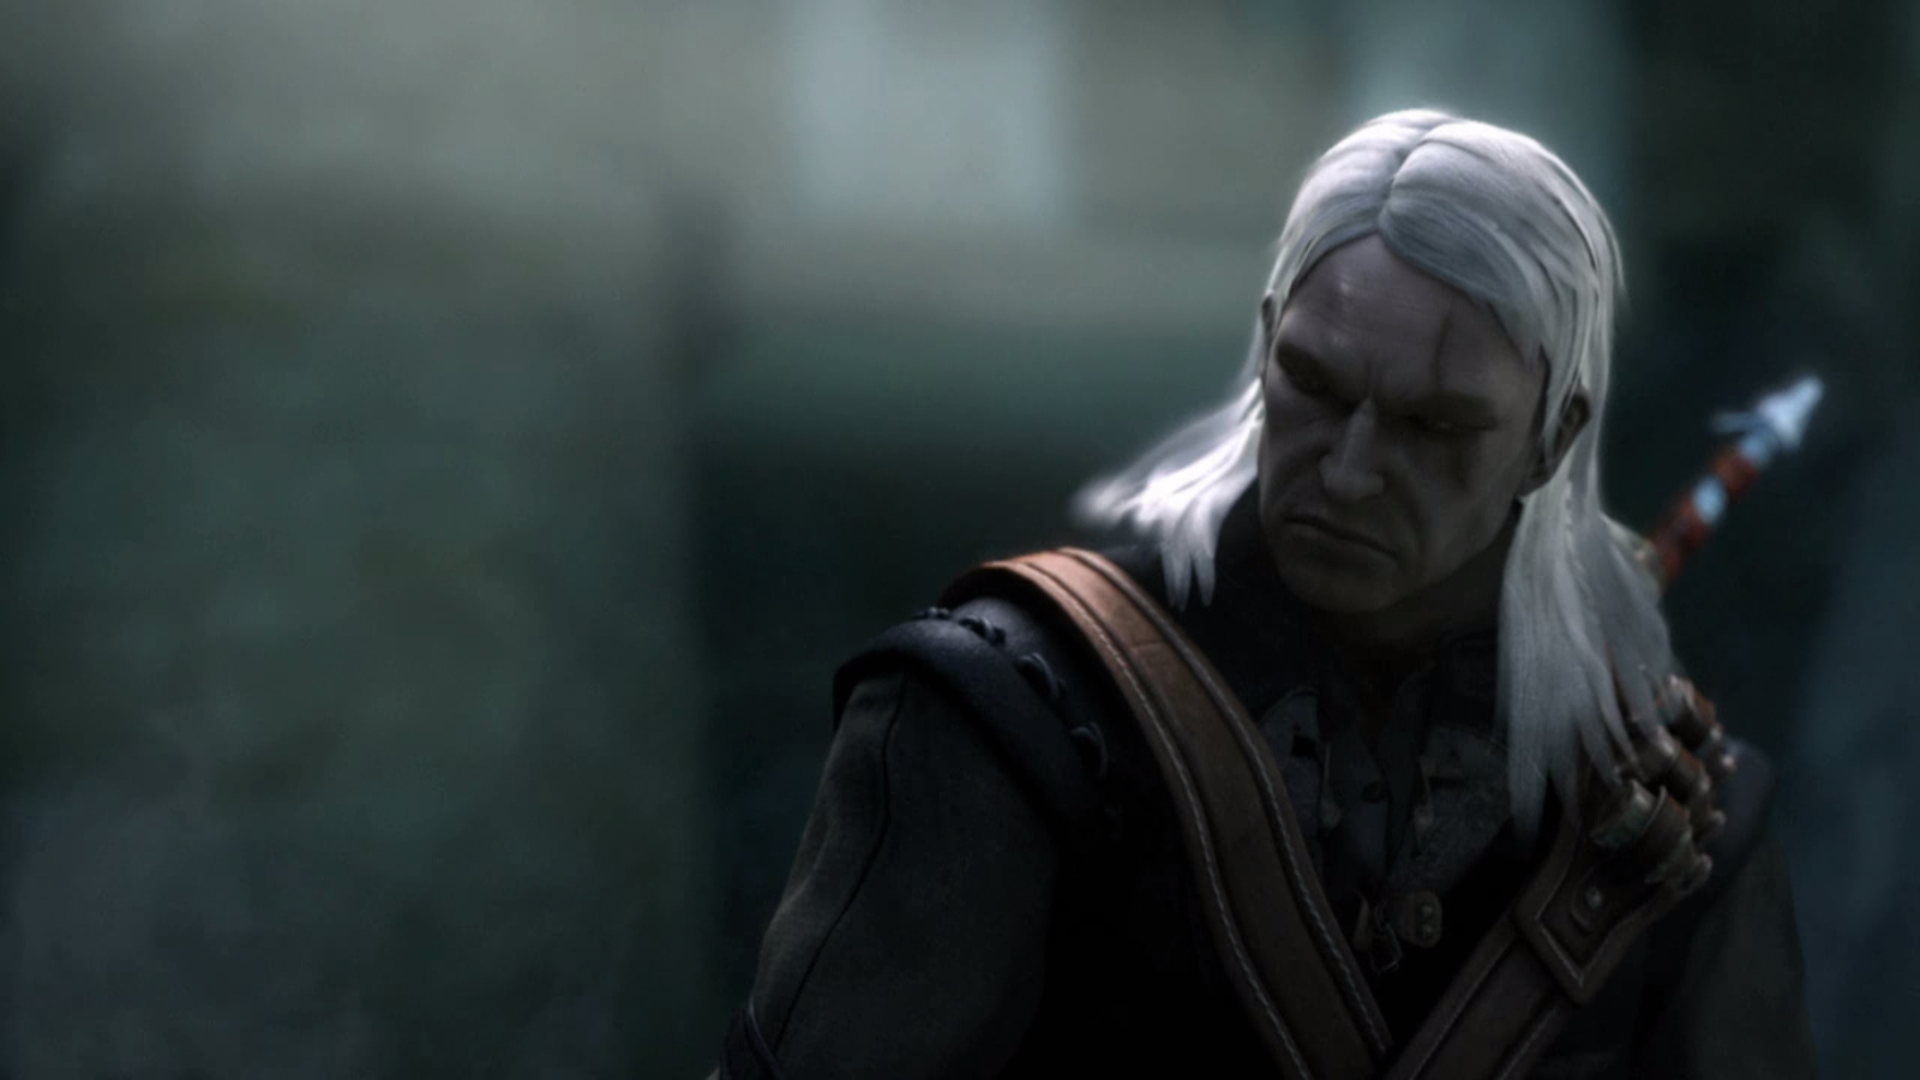 witcher_2014_07_09_23_23_47_849.png